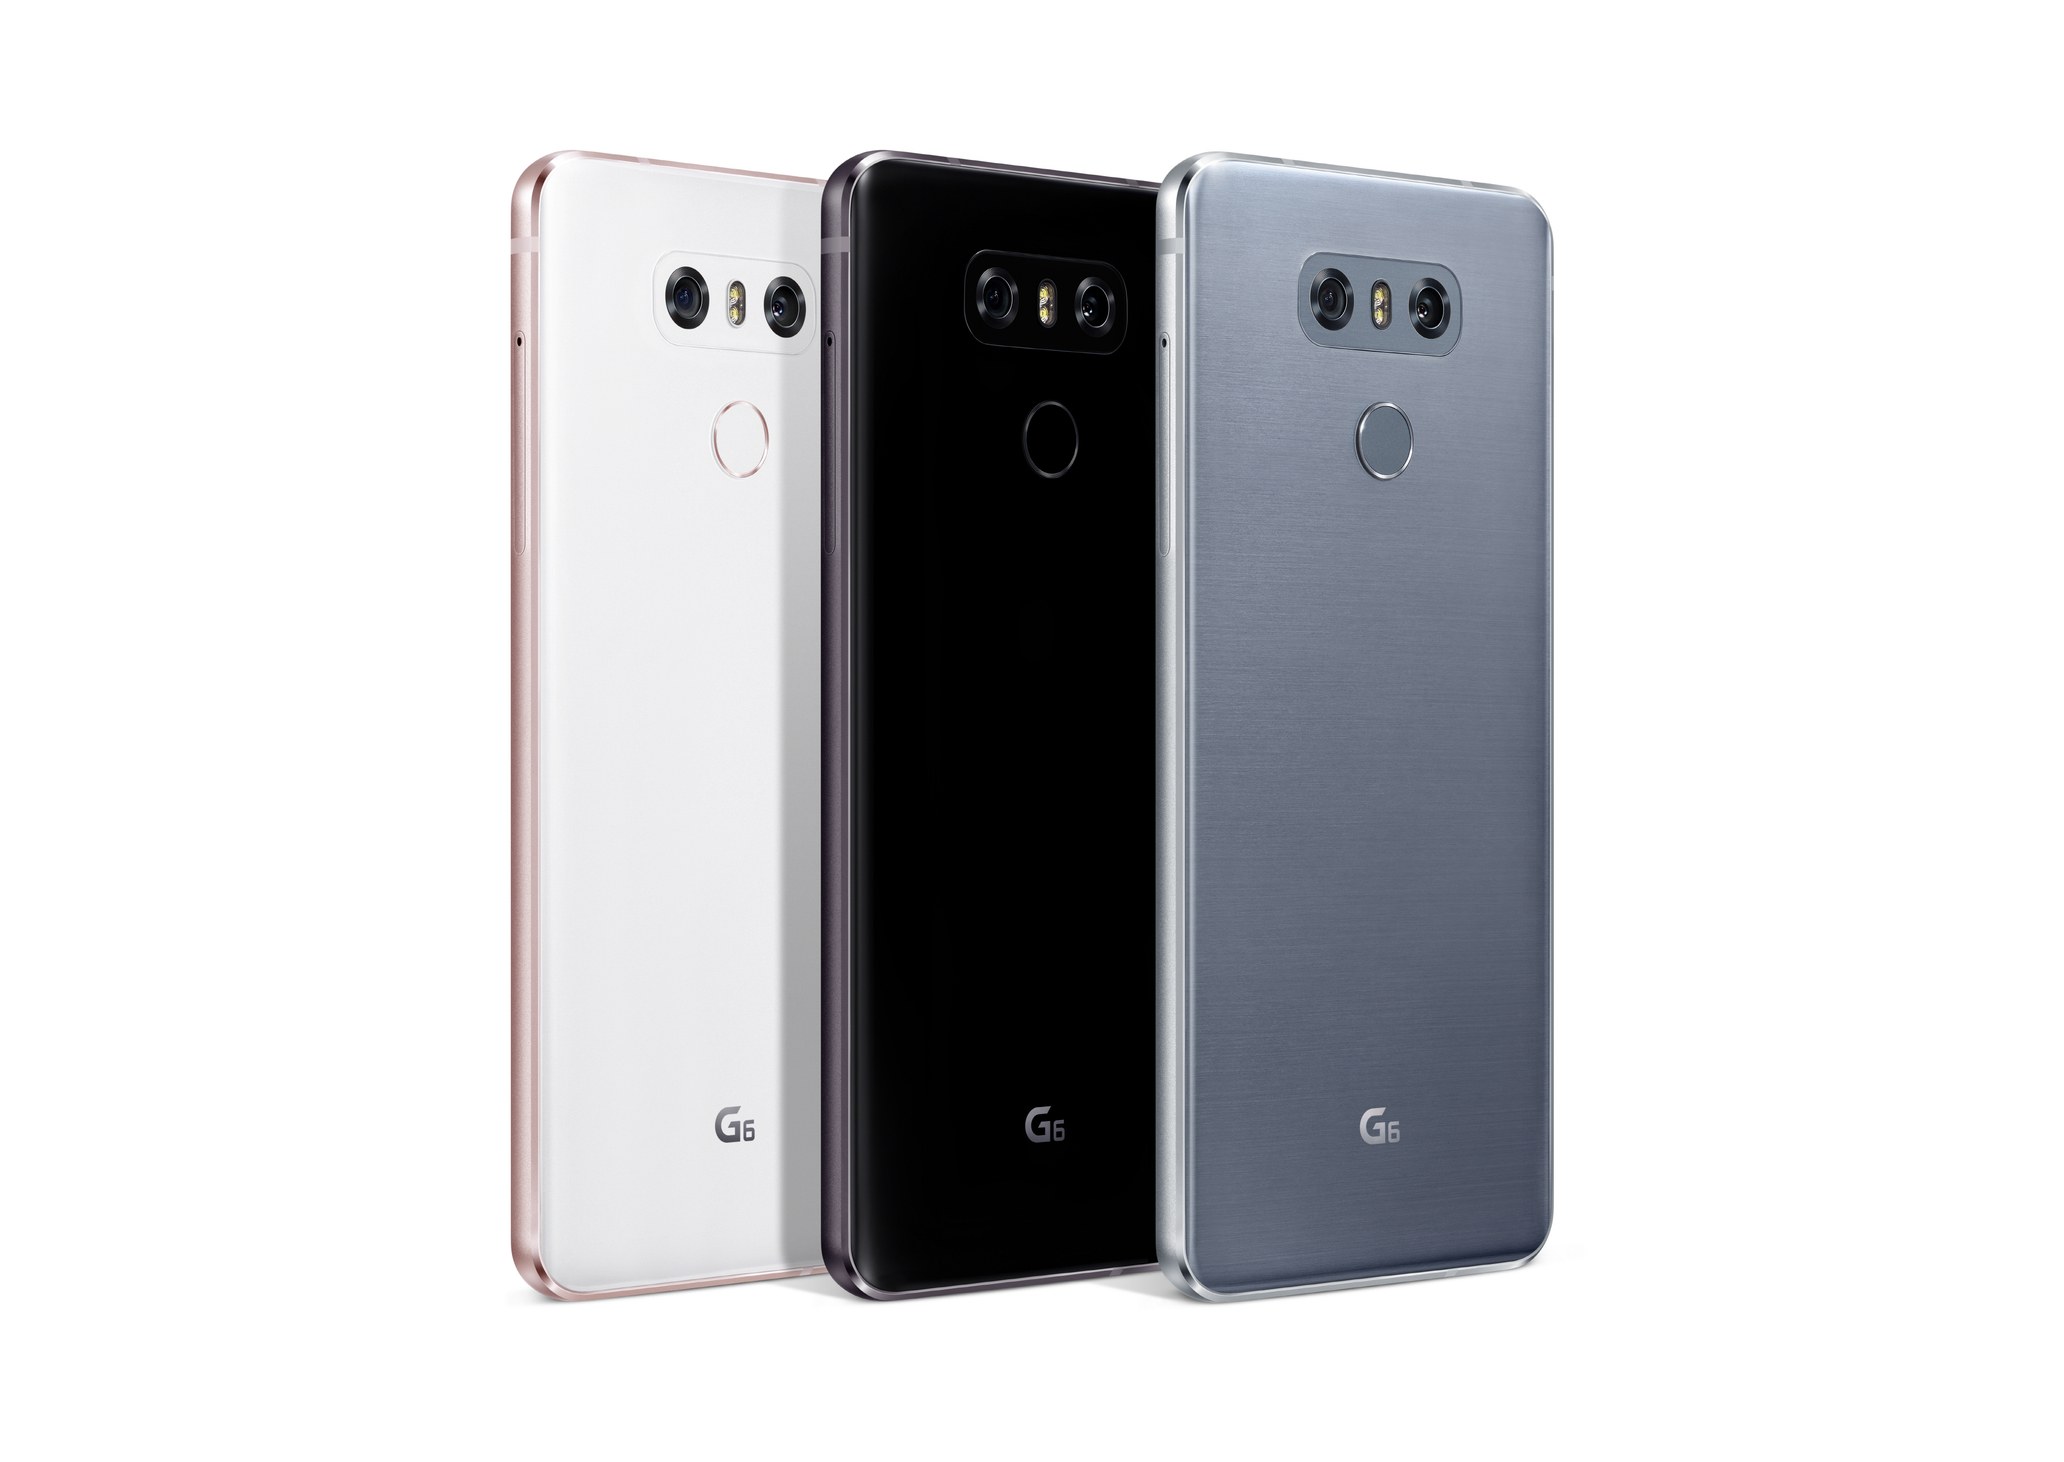 LG G6 031 Smartphone Research Groups IDC & Telsyte Contradict Each Other Over State Of Market